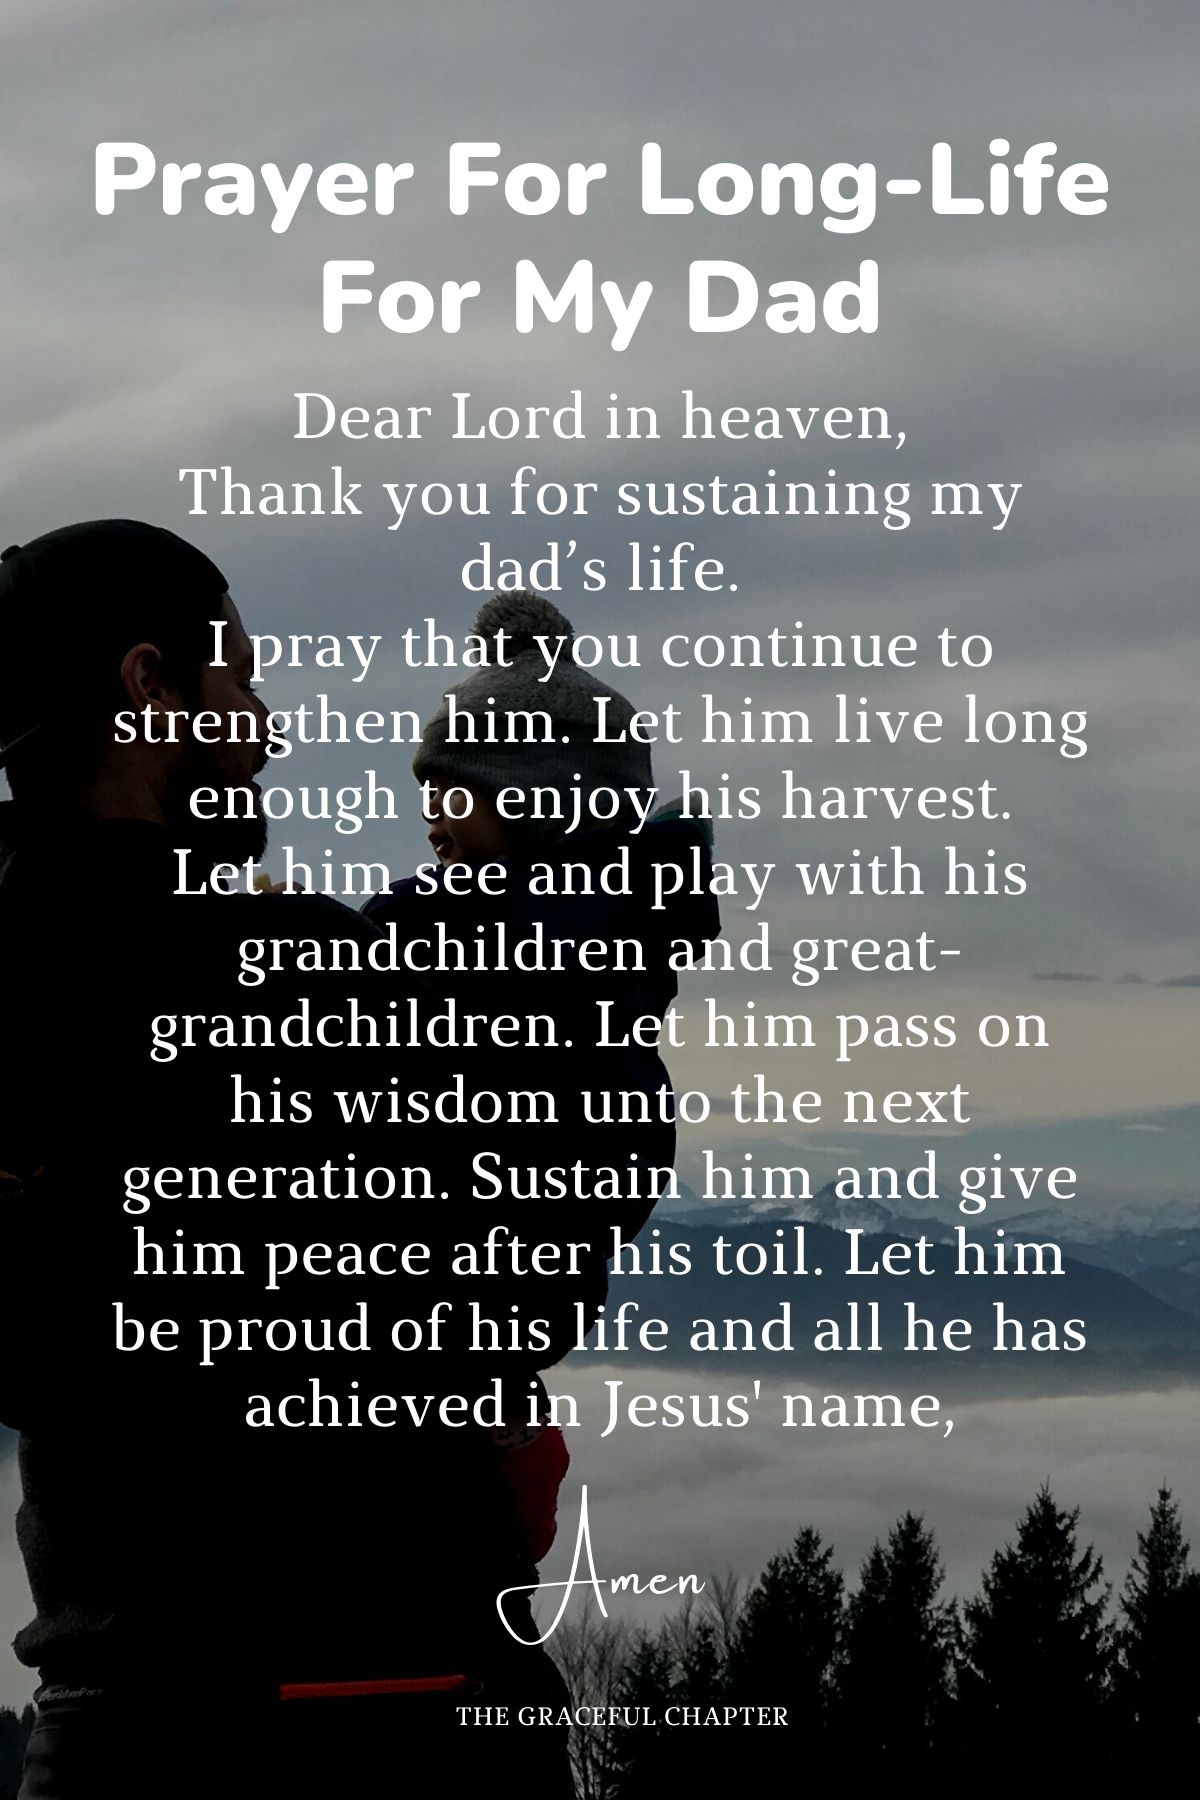 Prayer for long-life for my dad